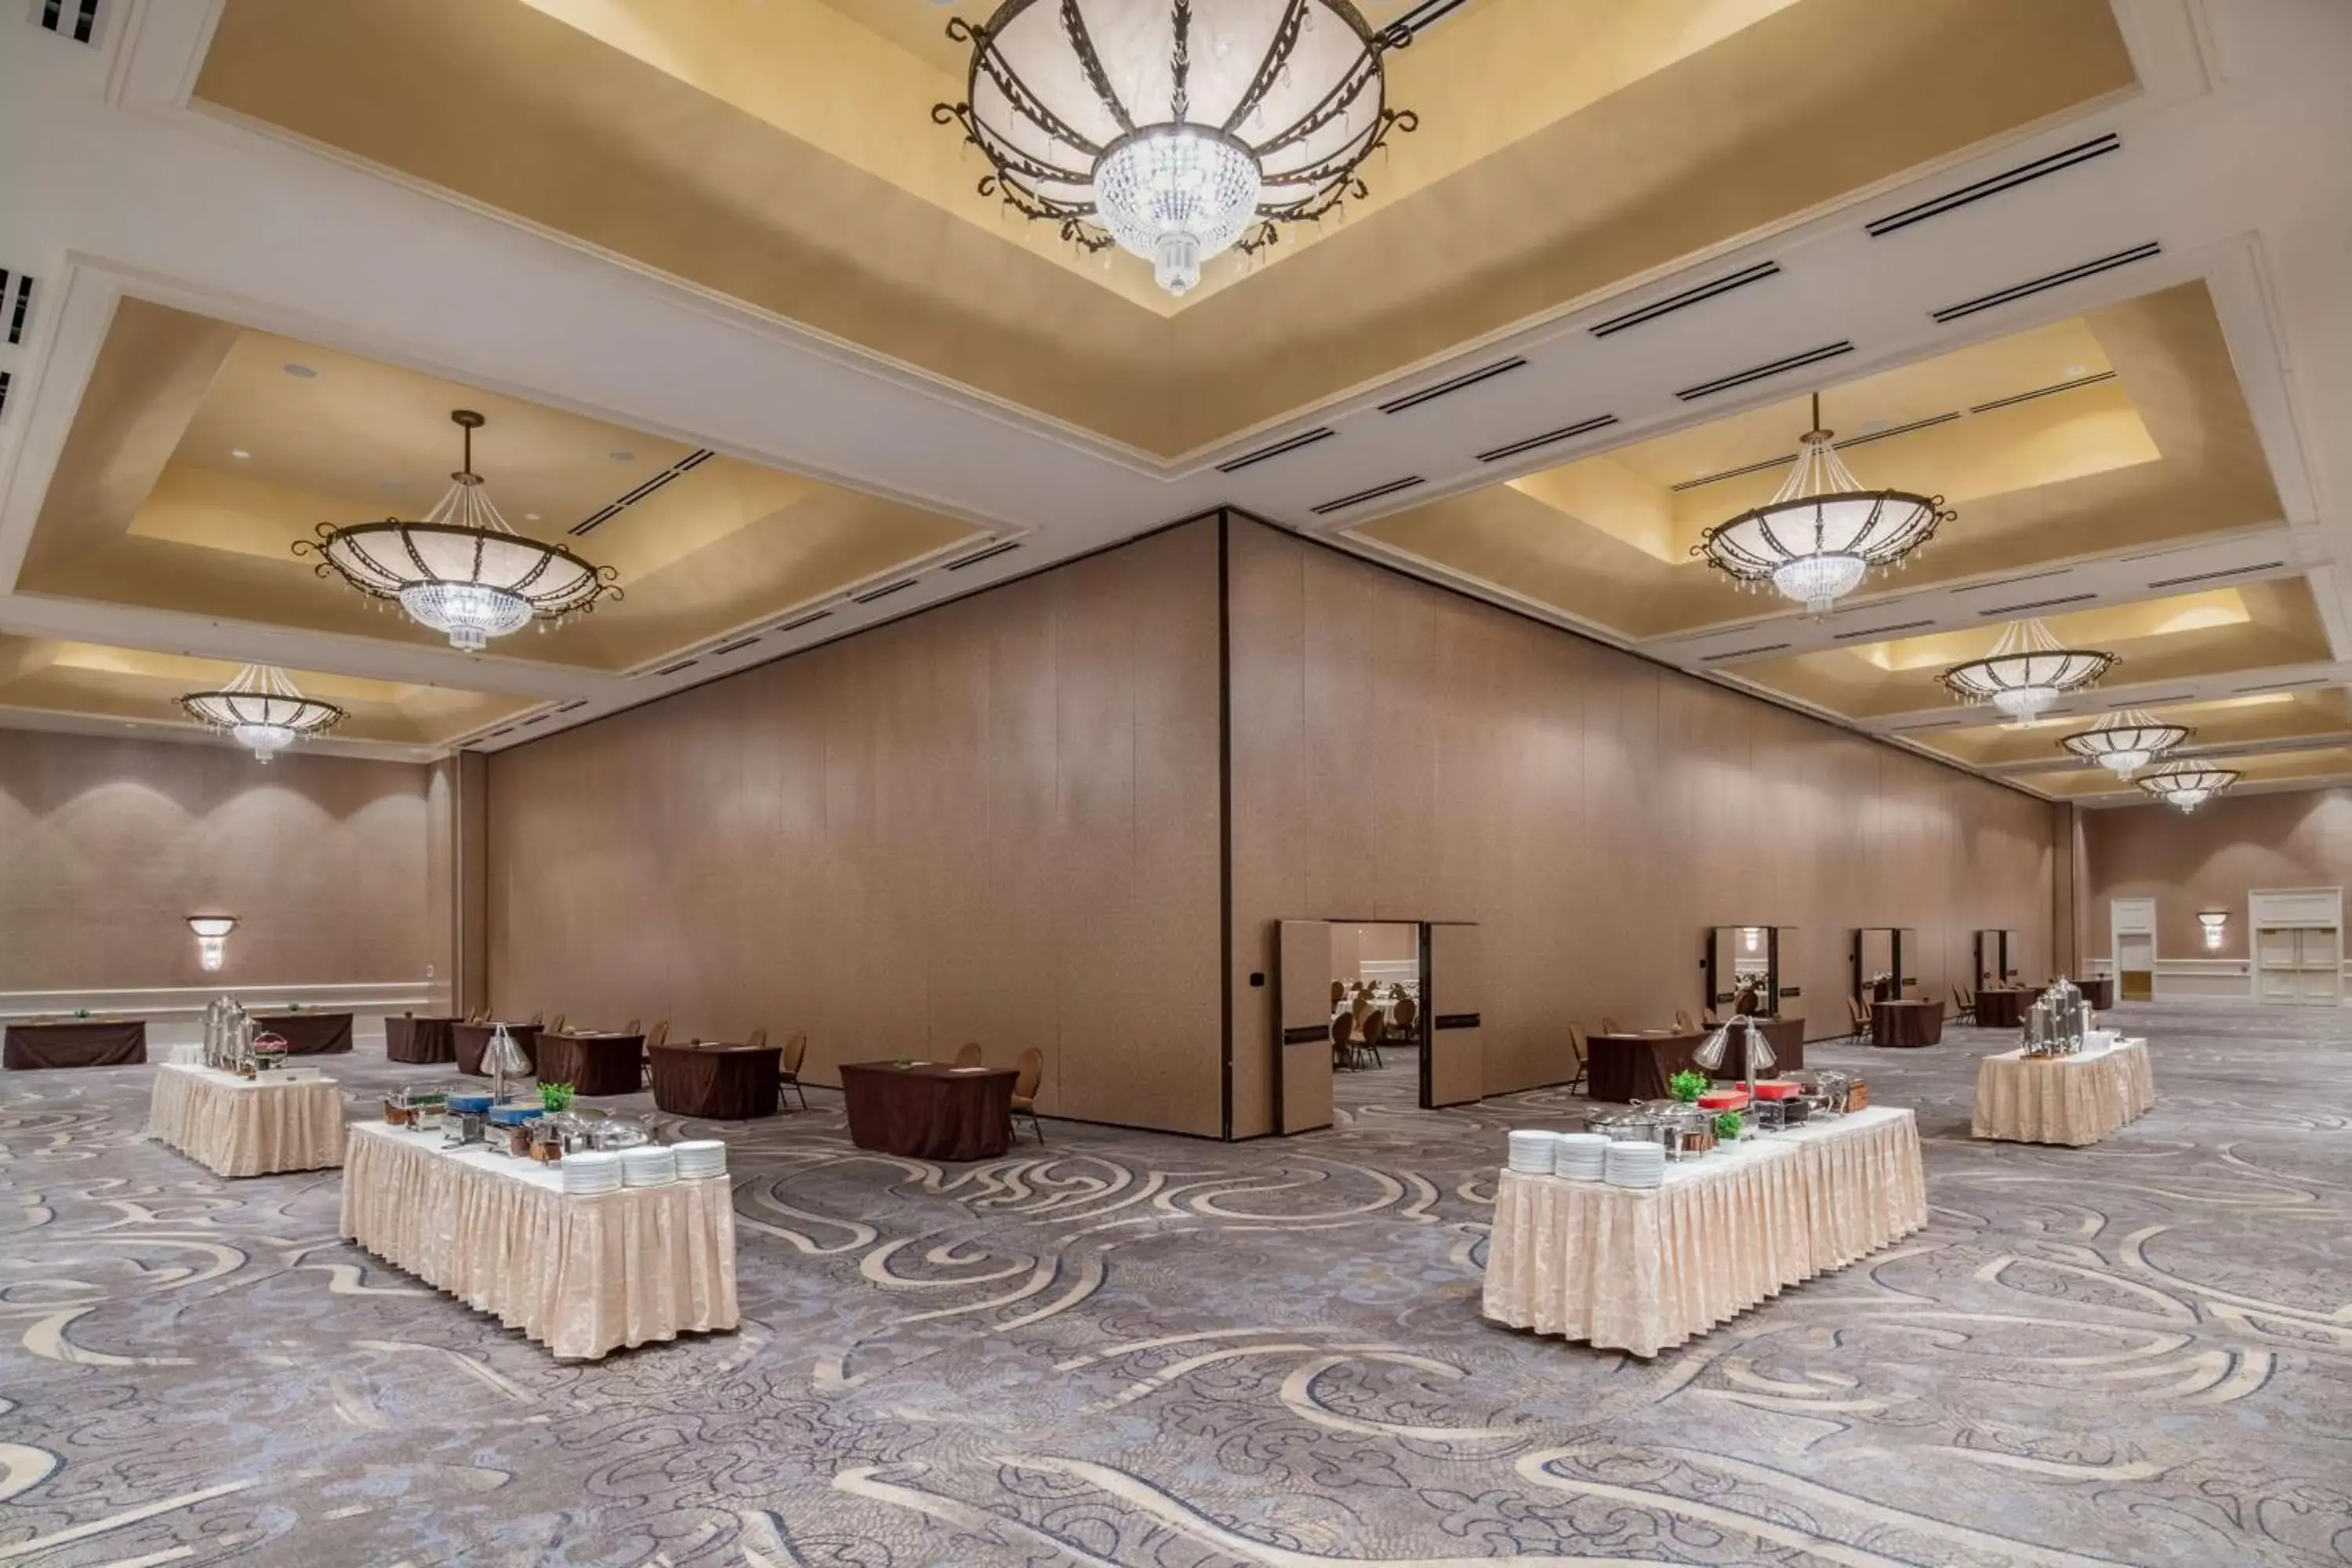 Meeting/conference room, Banquet Facilities in The Roosevelt Hotel New Orleans - Waldorf Astoria Hotels & Resorts